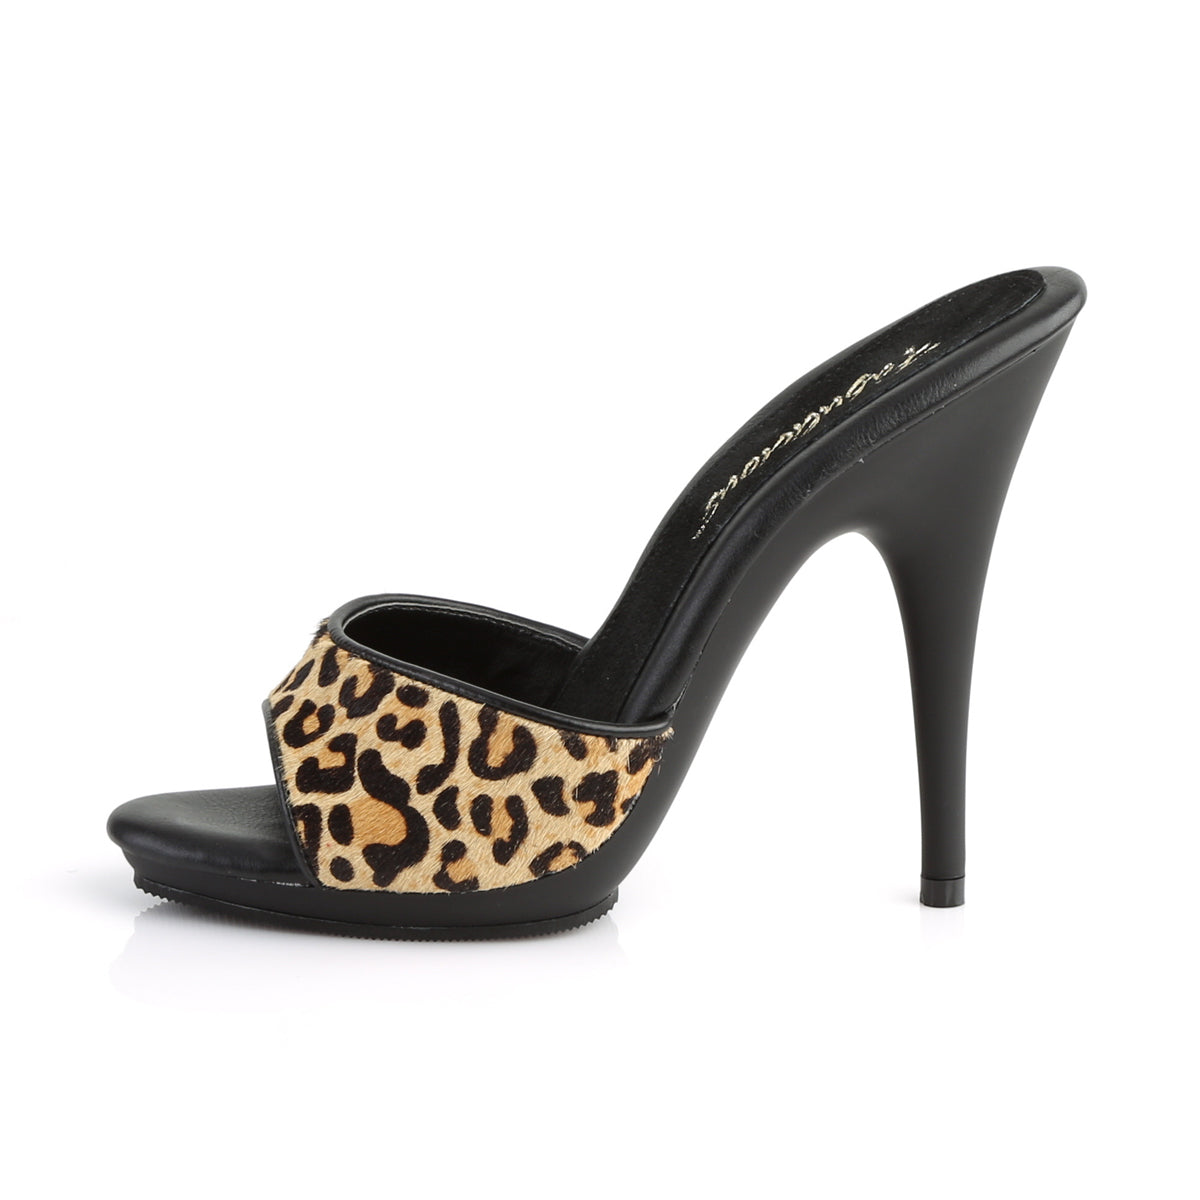 FABULICIOUS POISE-501FUR LEOPARD PRINT 5 INCH HIGH HEEL SHOES SIZE 7 SALE